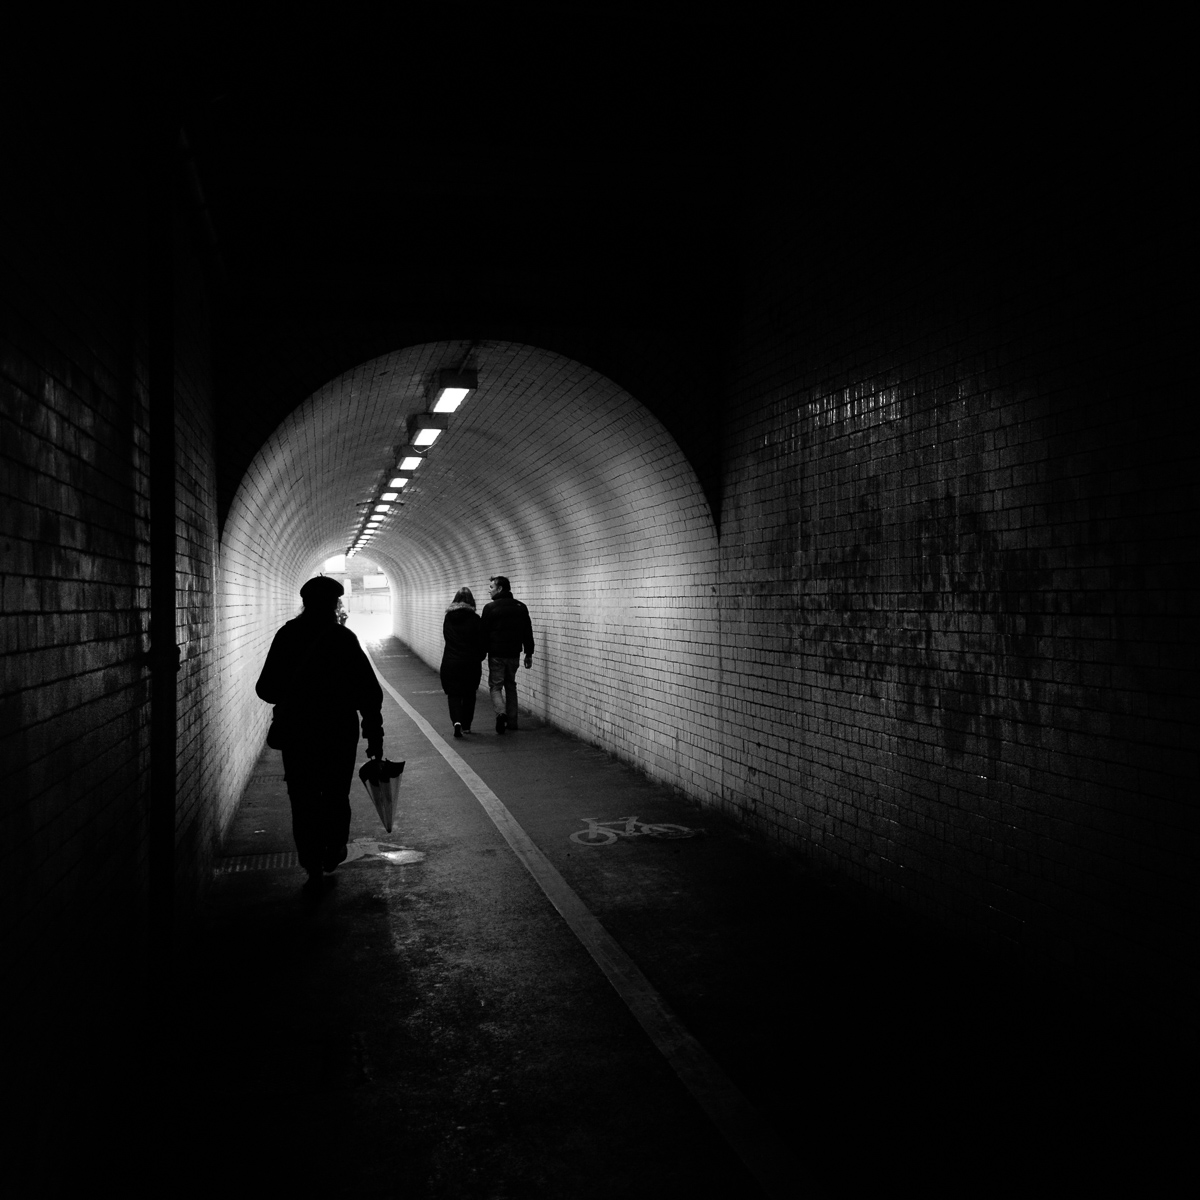 At the end of the tunnel, Martin Holyoak